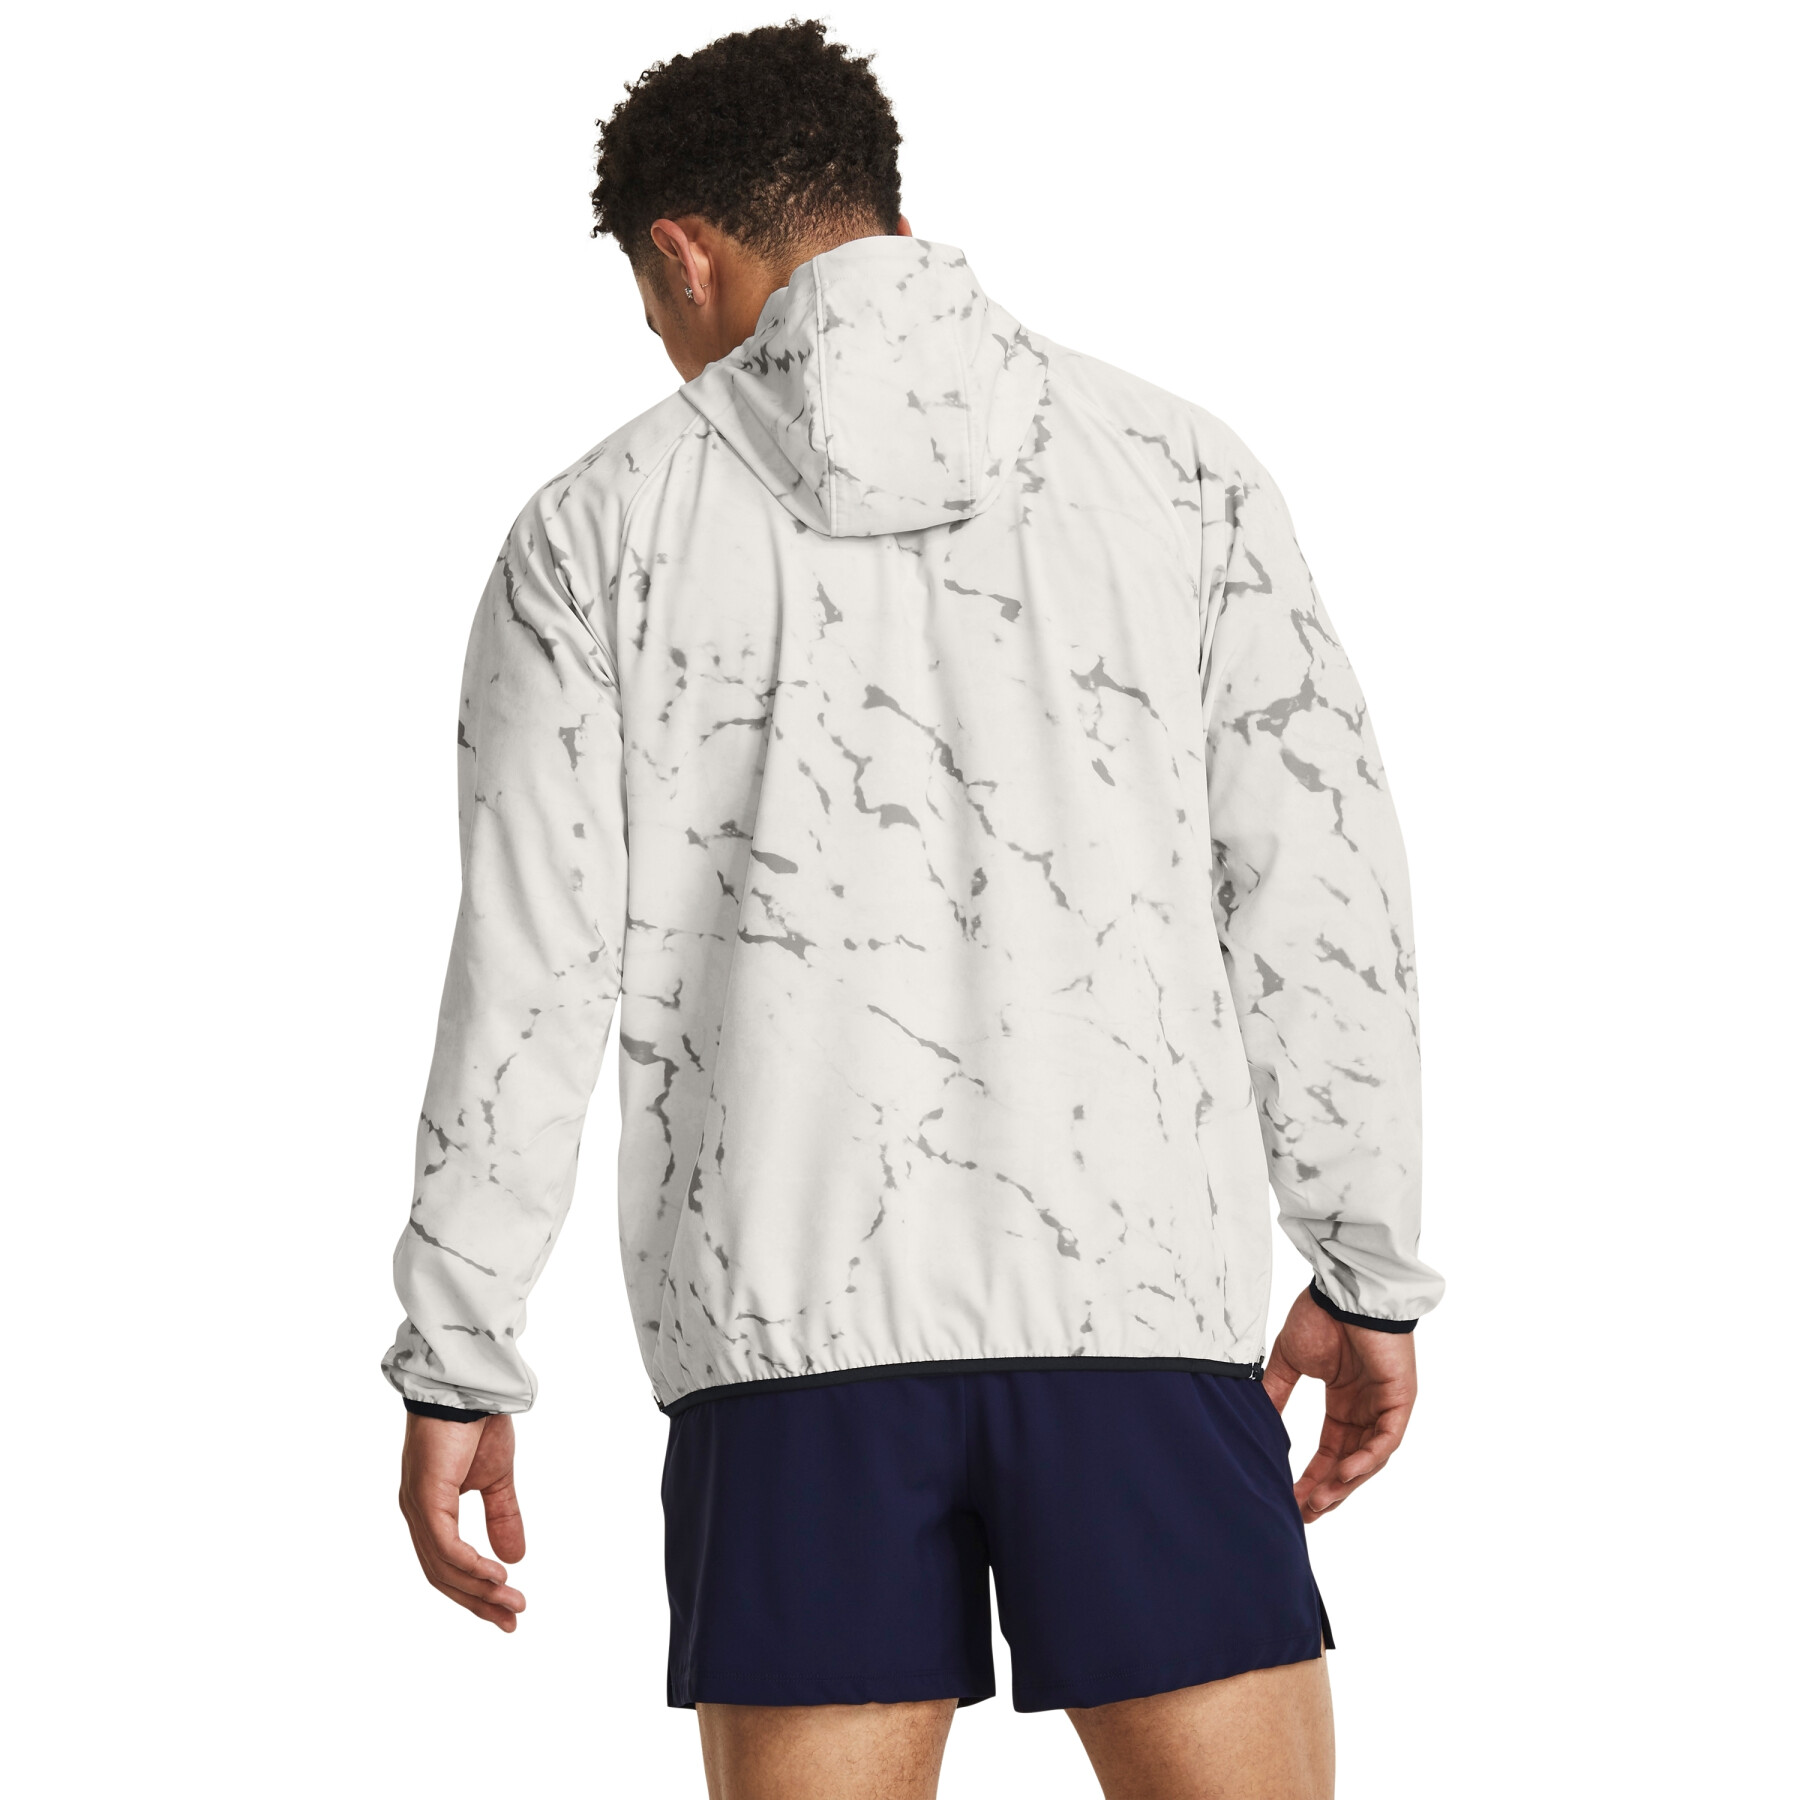 Waterproof jacket Under Armour Project Rock Unstoppable